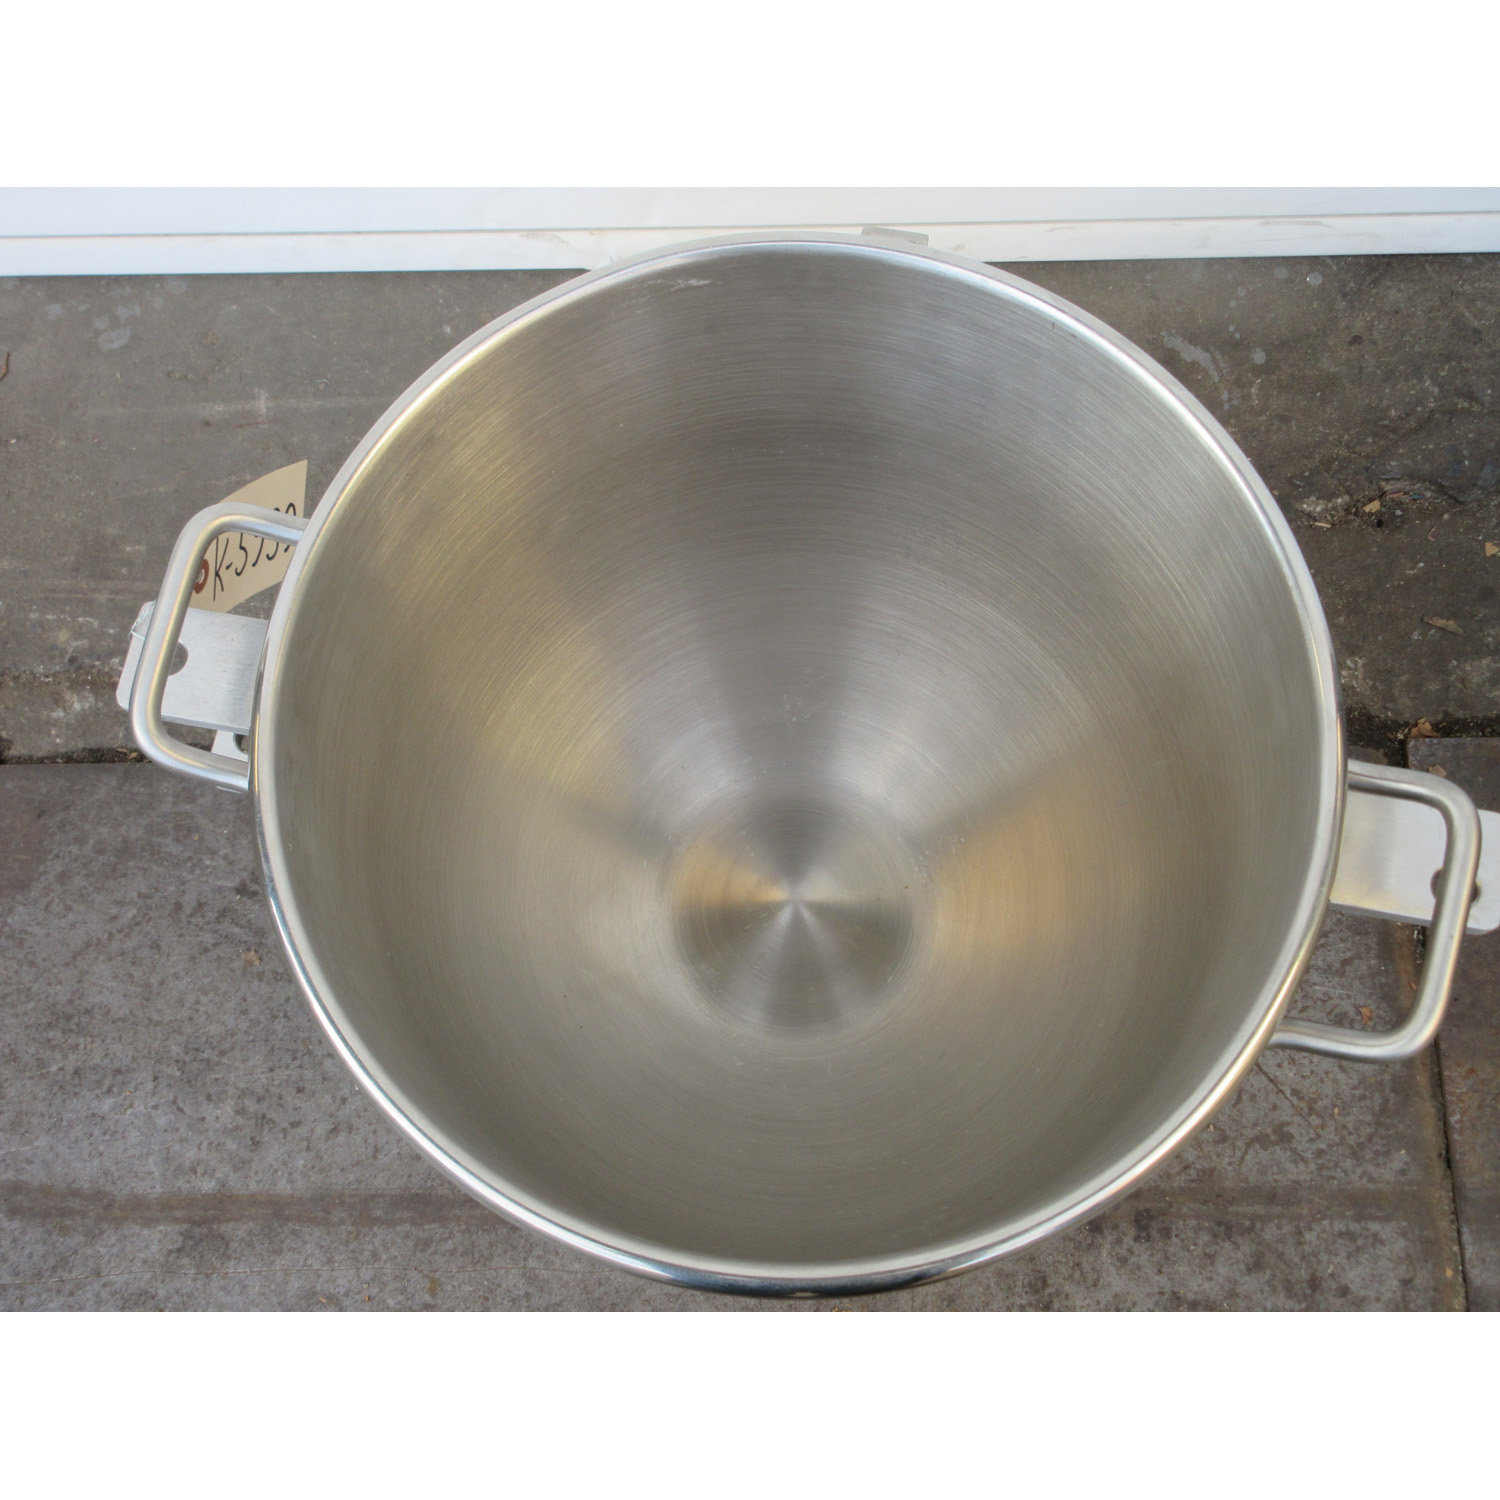 Hobart HL1640 Mixer Bowl 40 Qt for HL600 Mixer, Used Great Condition image 1